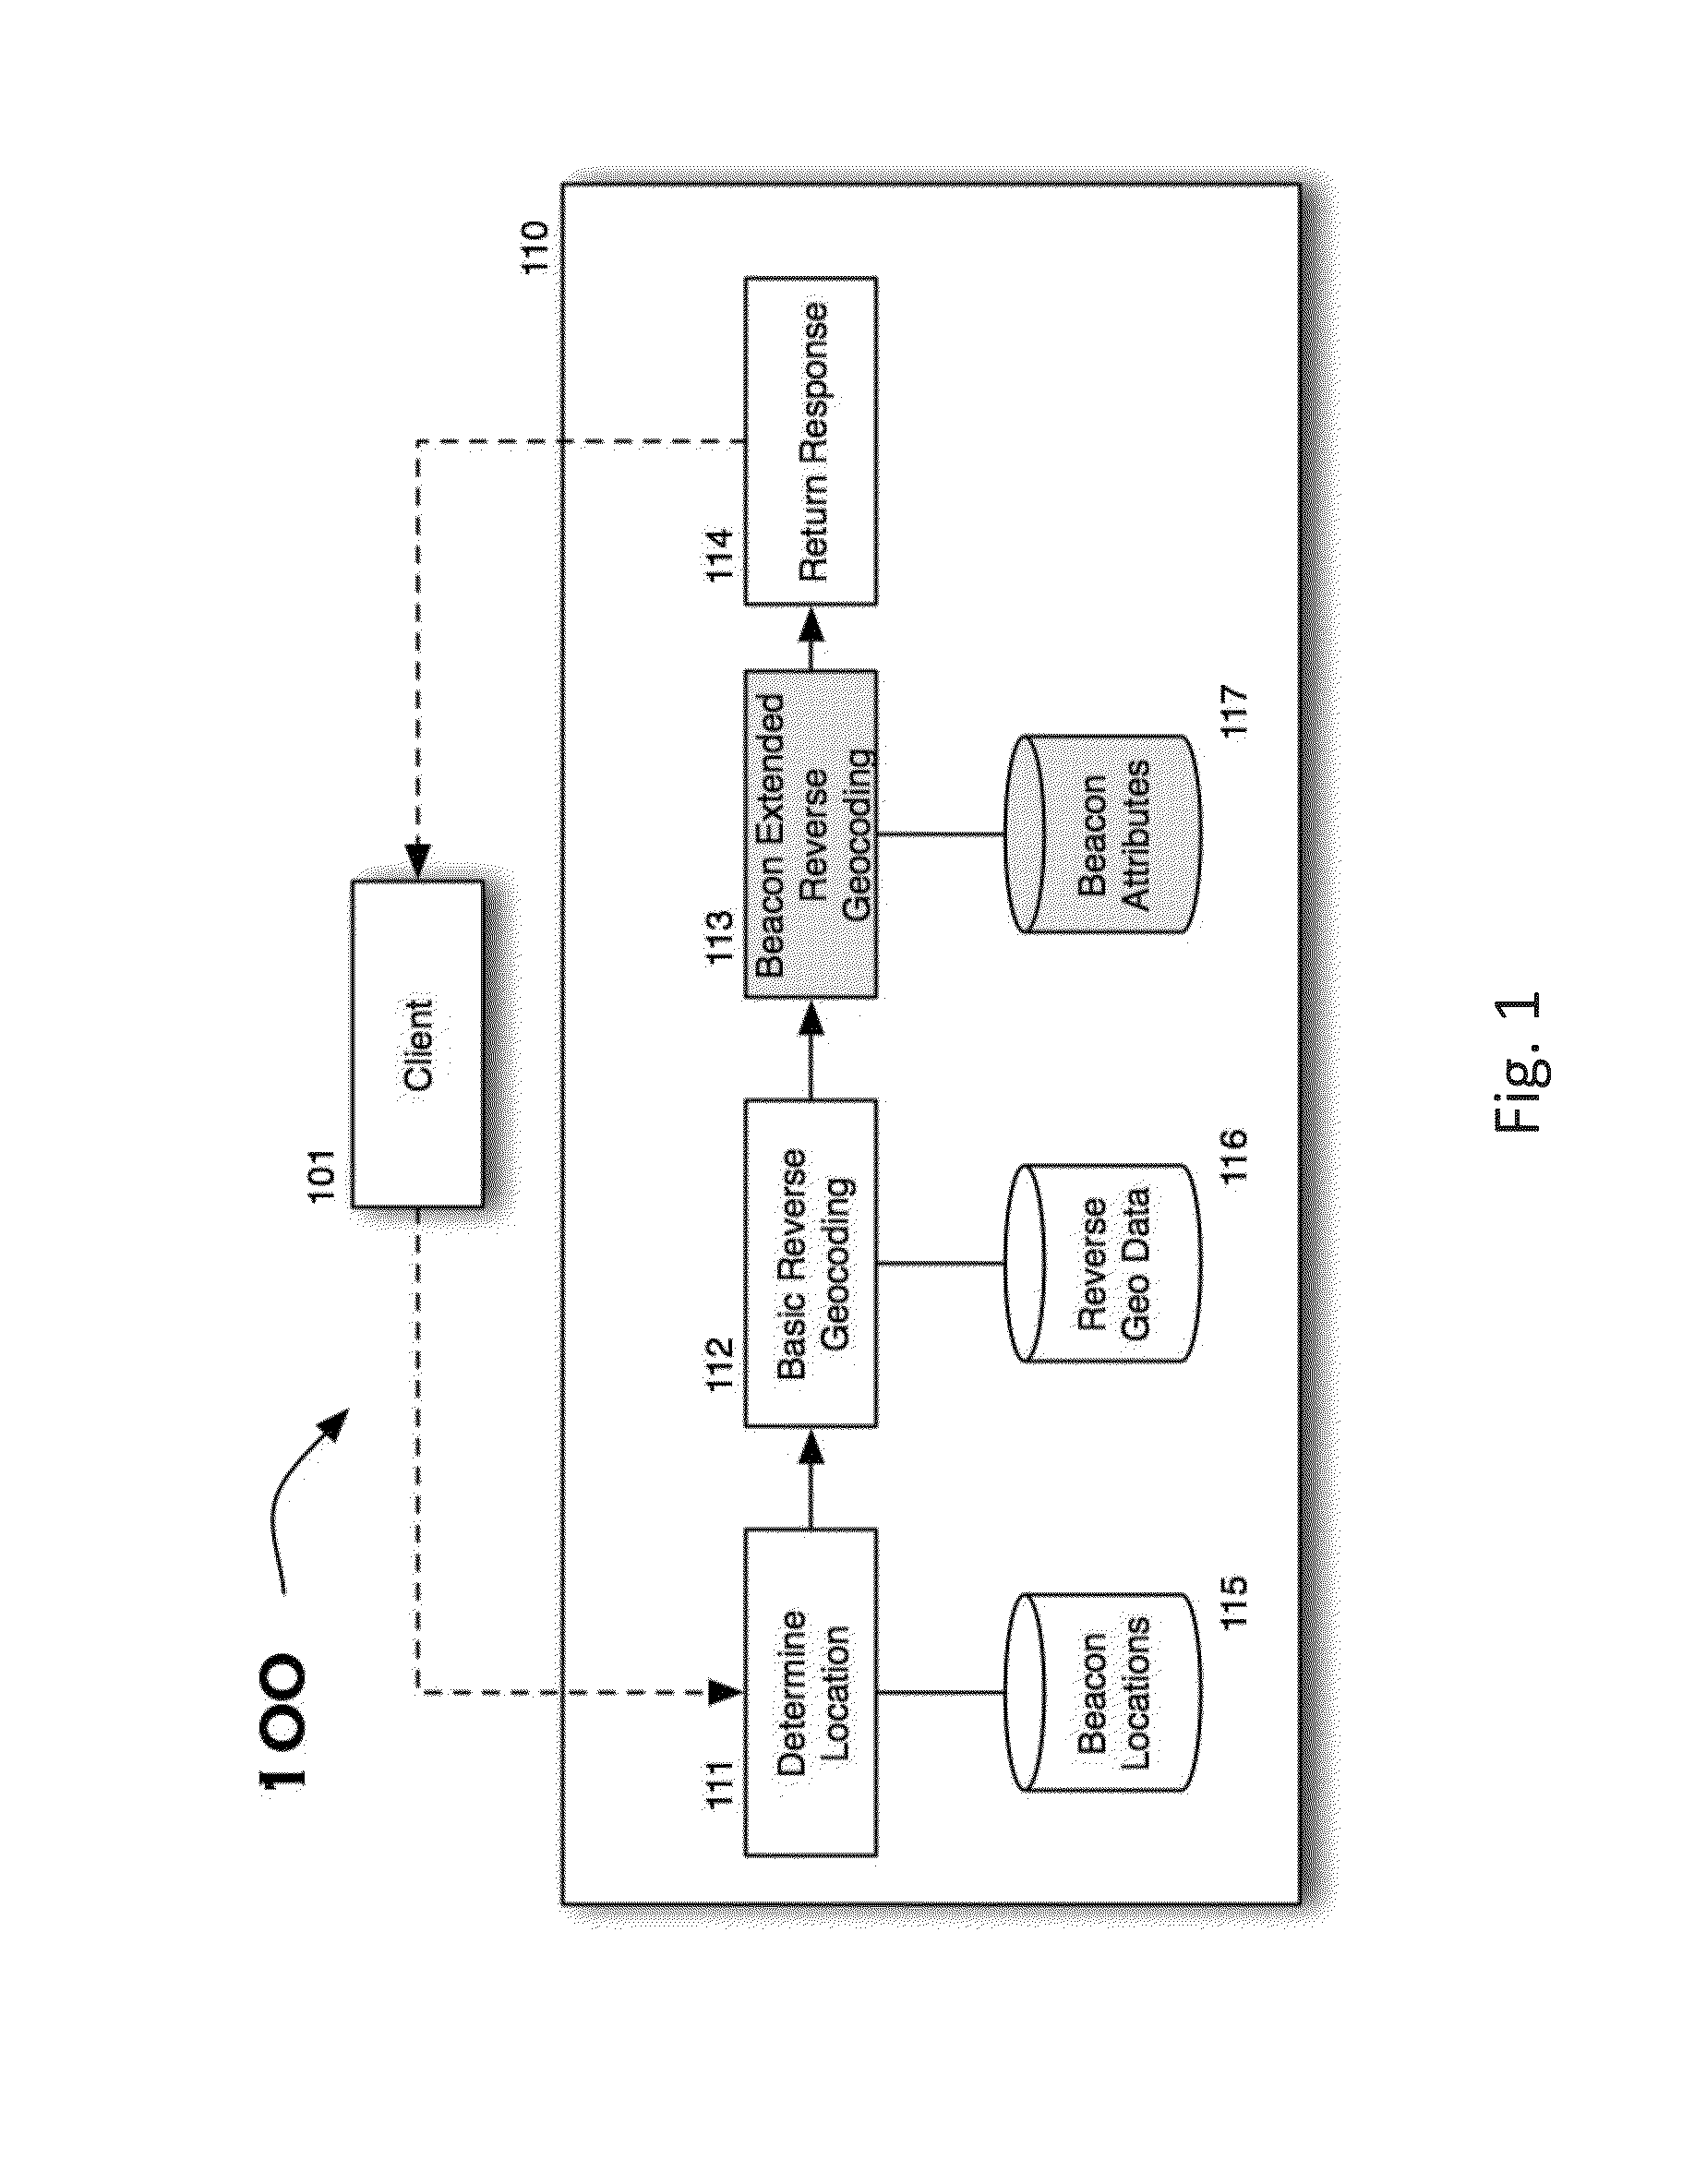 Method and system for capturing and providing typological and contextual information about a location based on wireless beacons